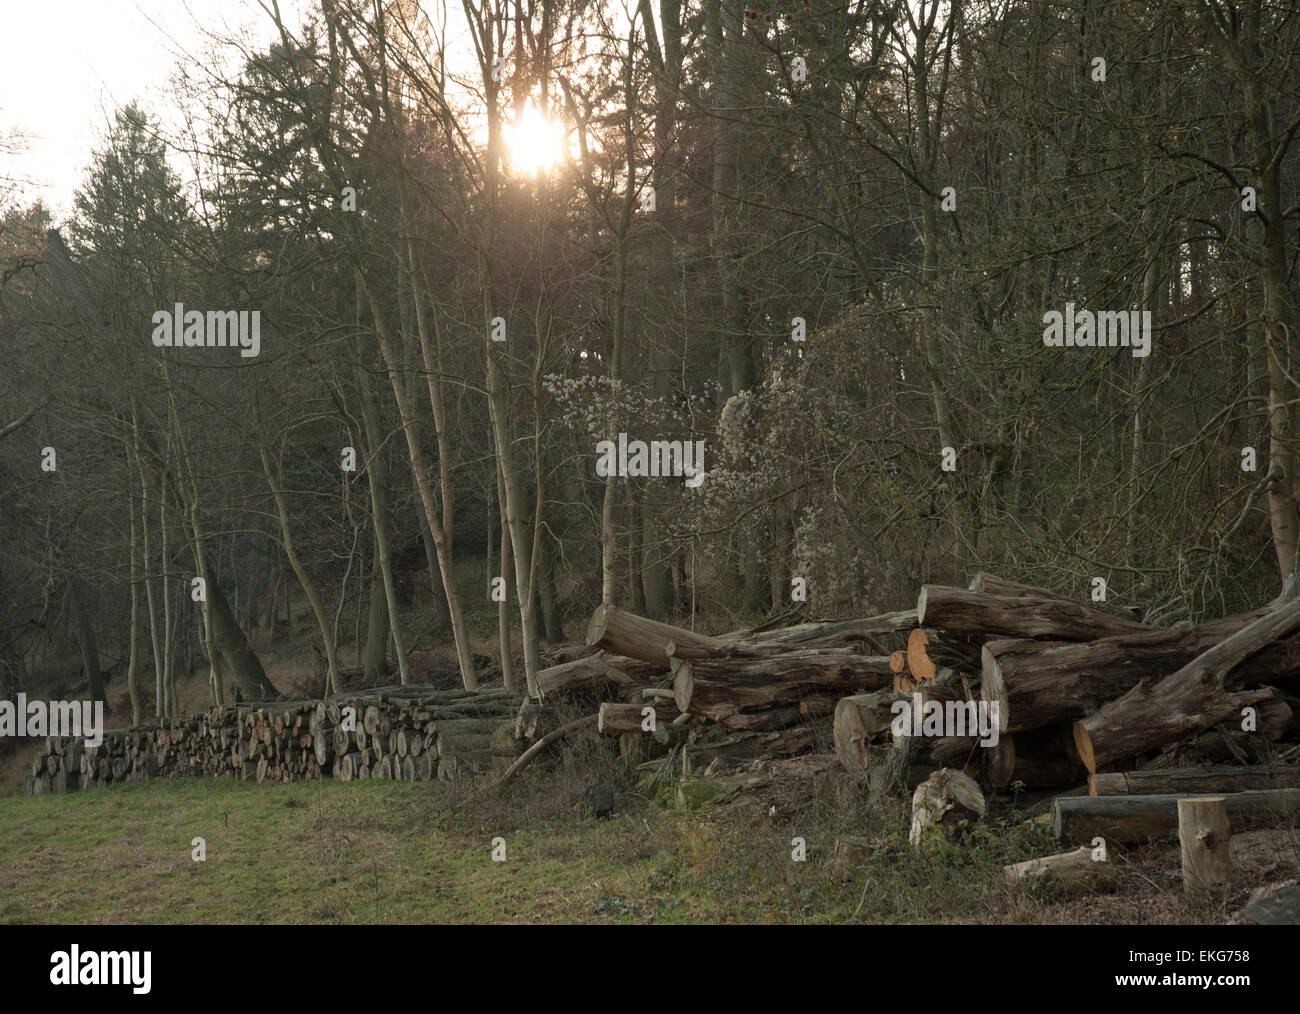 Felled tree stumps stacked in woodland Stock Photo